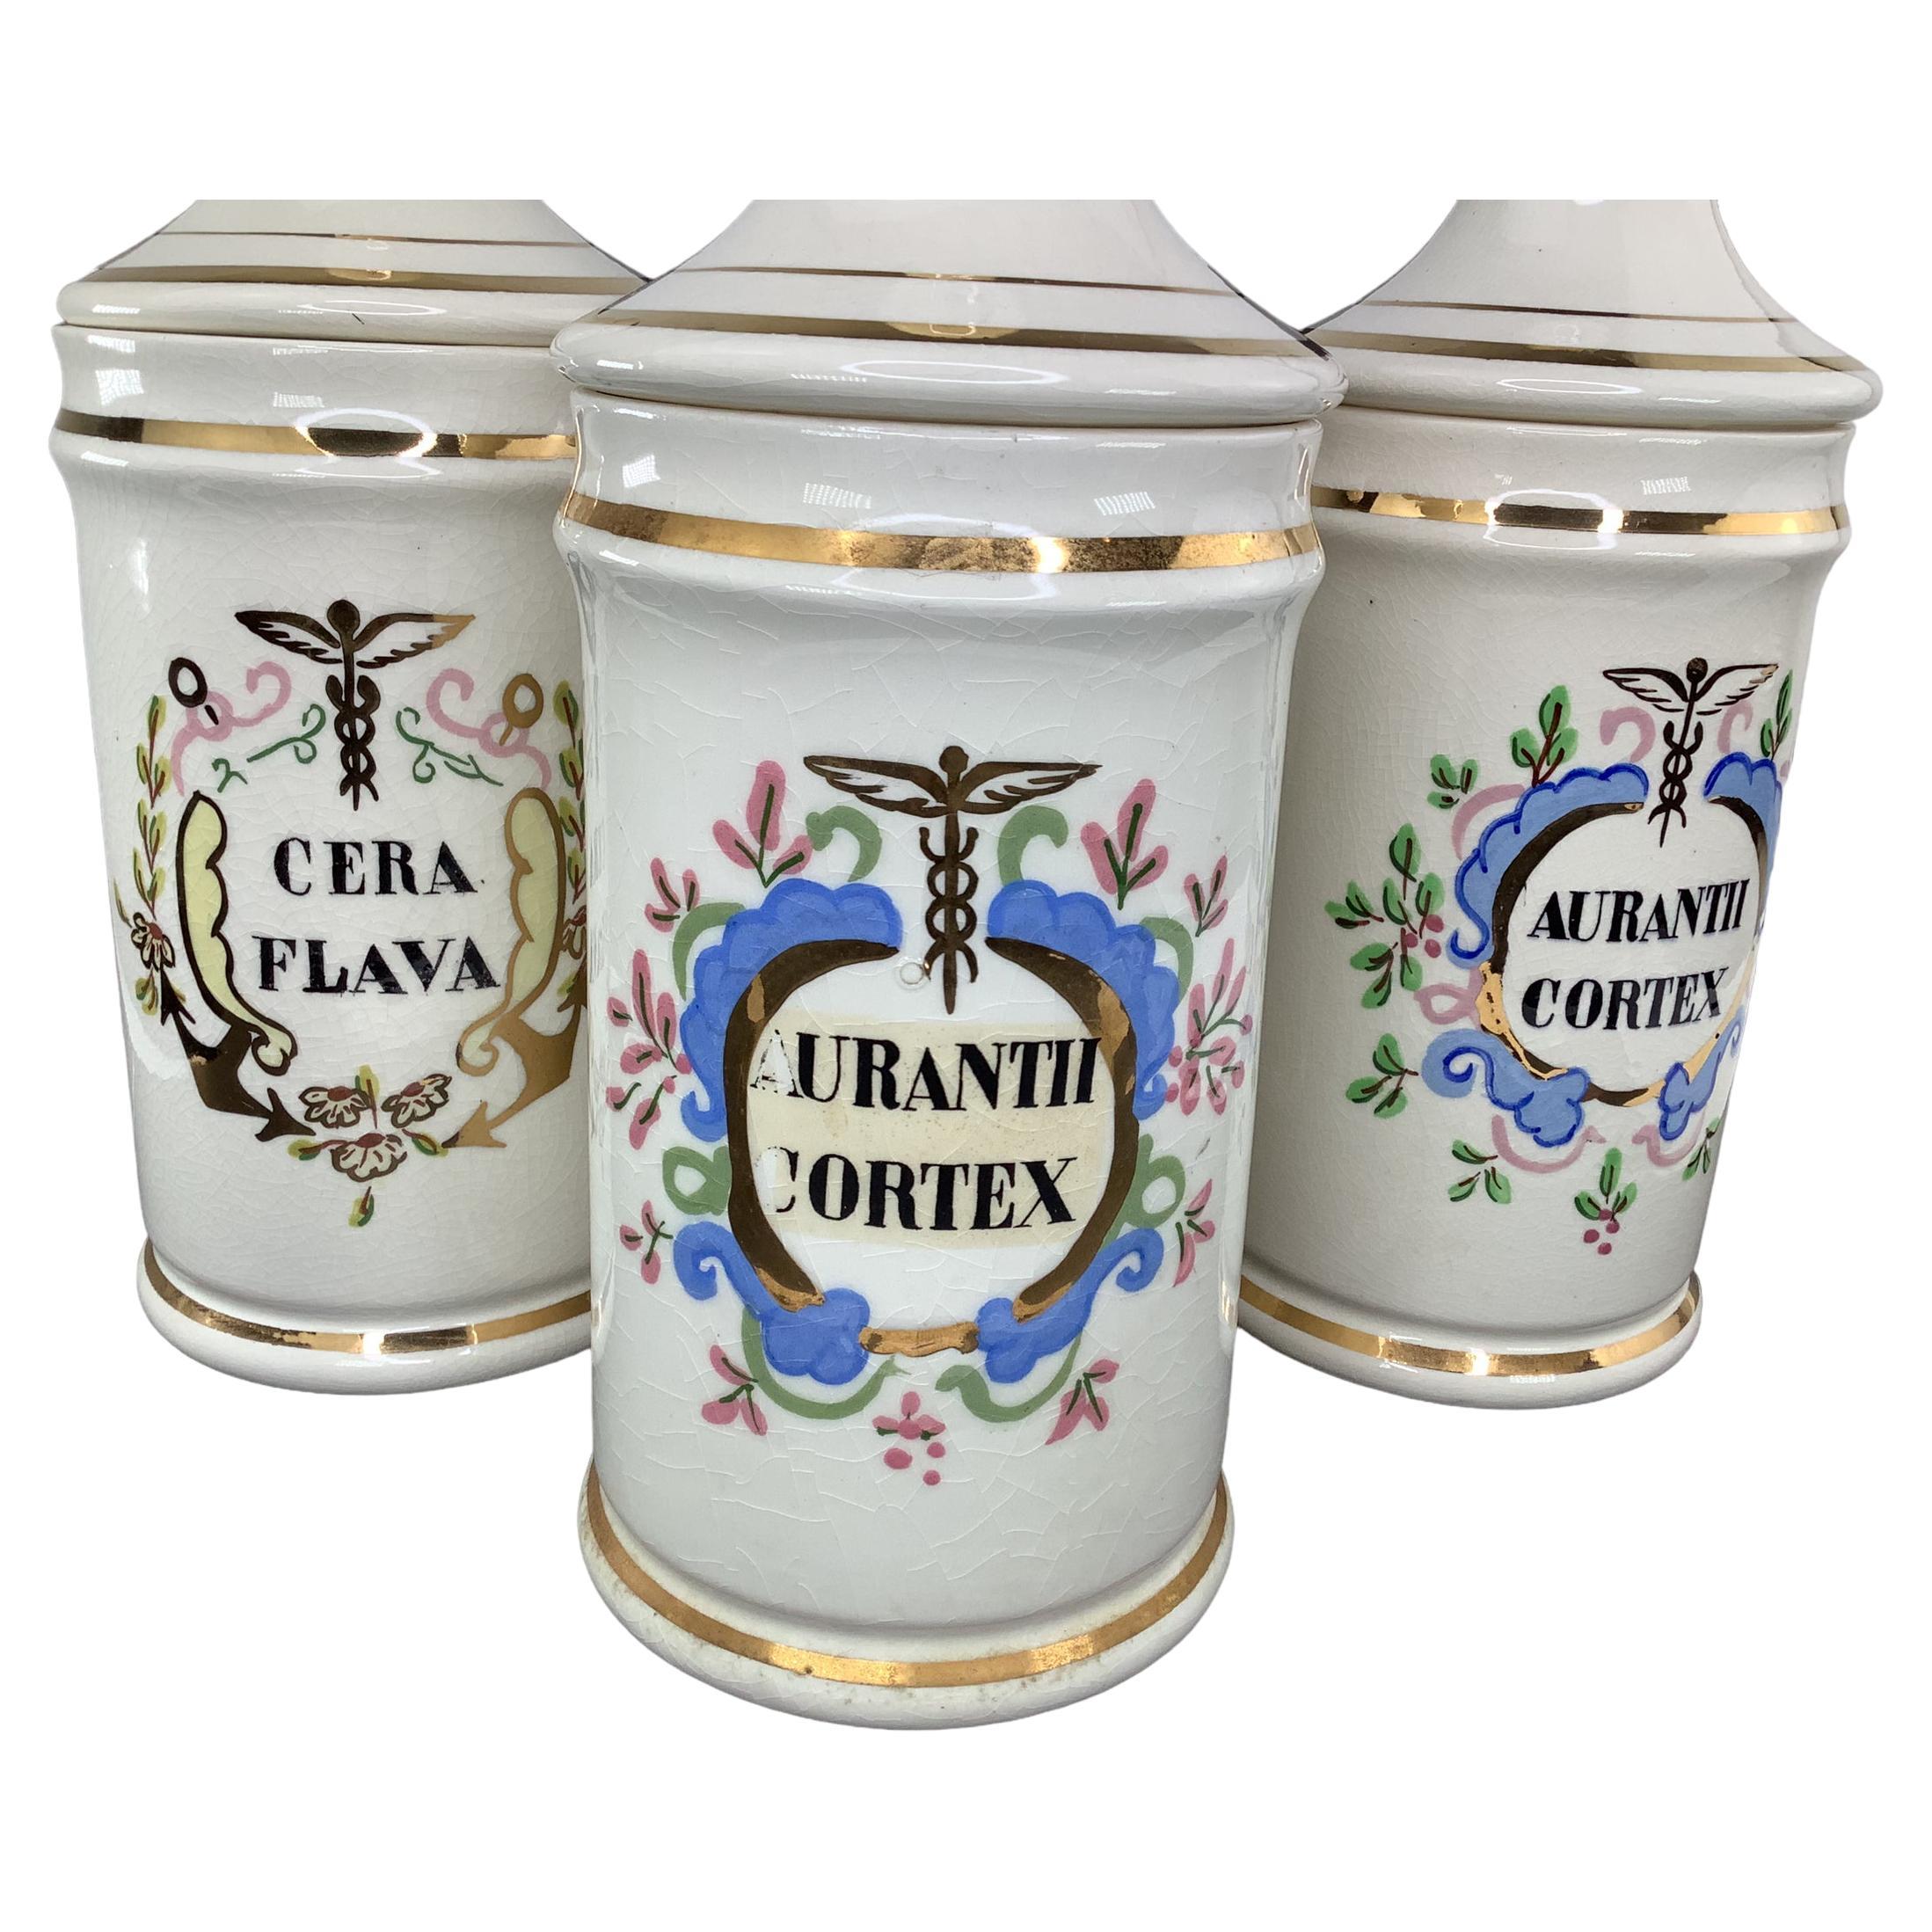 Set of 3 French Antique Porcelain Apothecary Jars. Each with the corresponding names of the drugs that was contained in the jars. Hand decorated with floral motifs and trimmed in 22k gold. All three are god vintage condition with no visible chips or